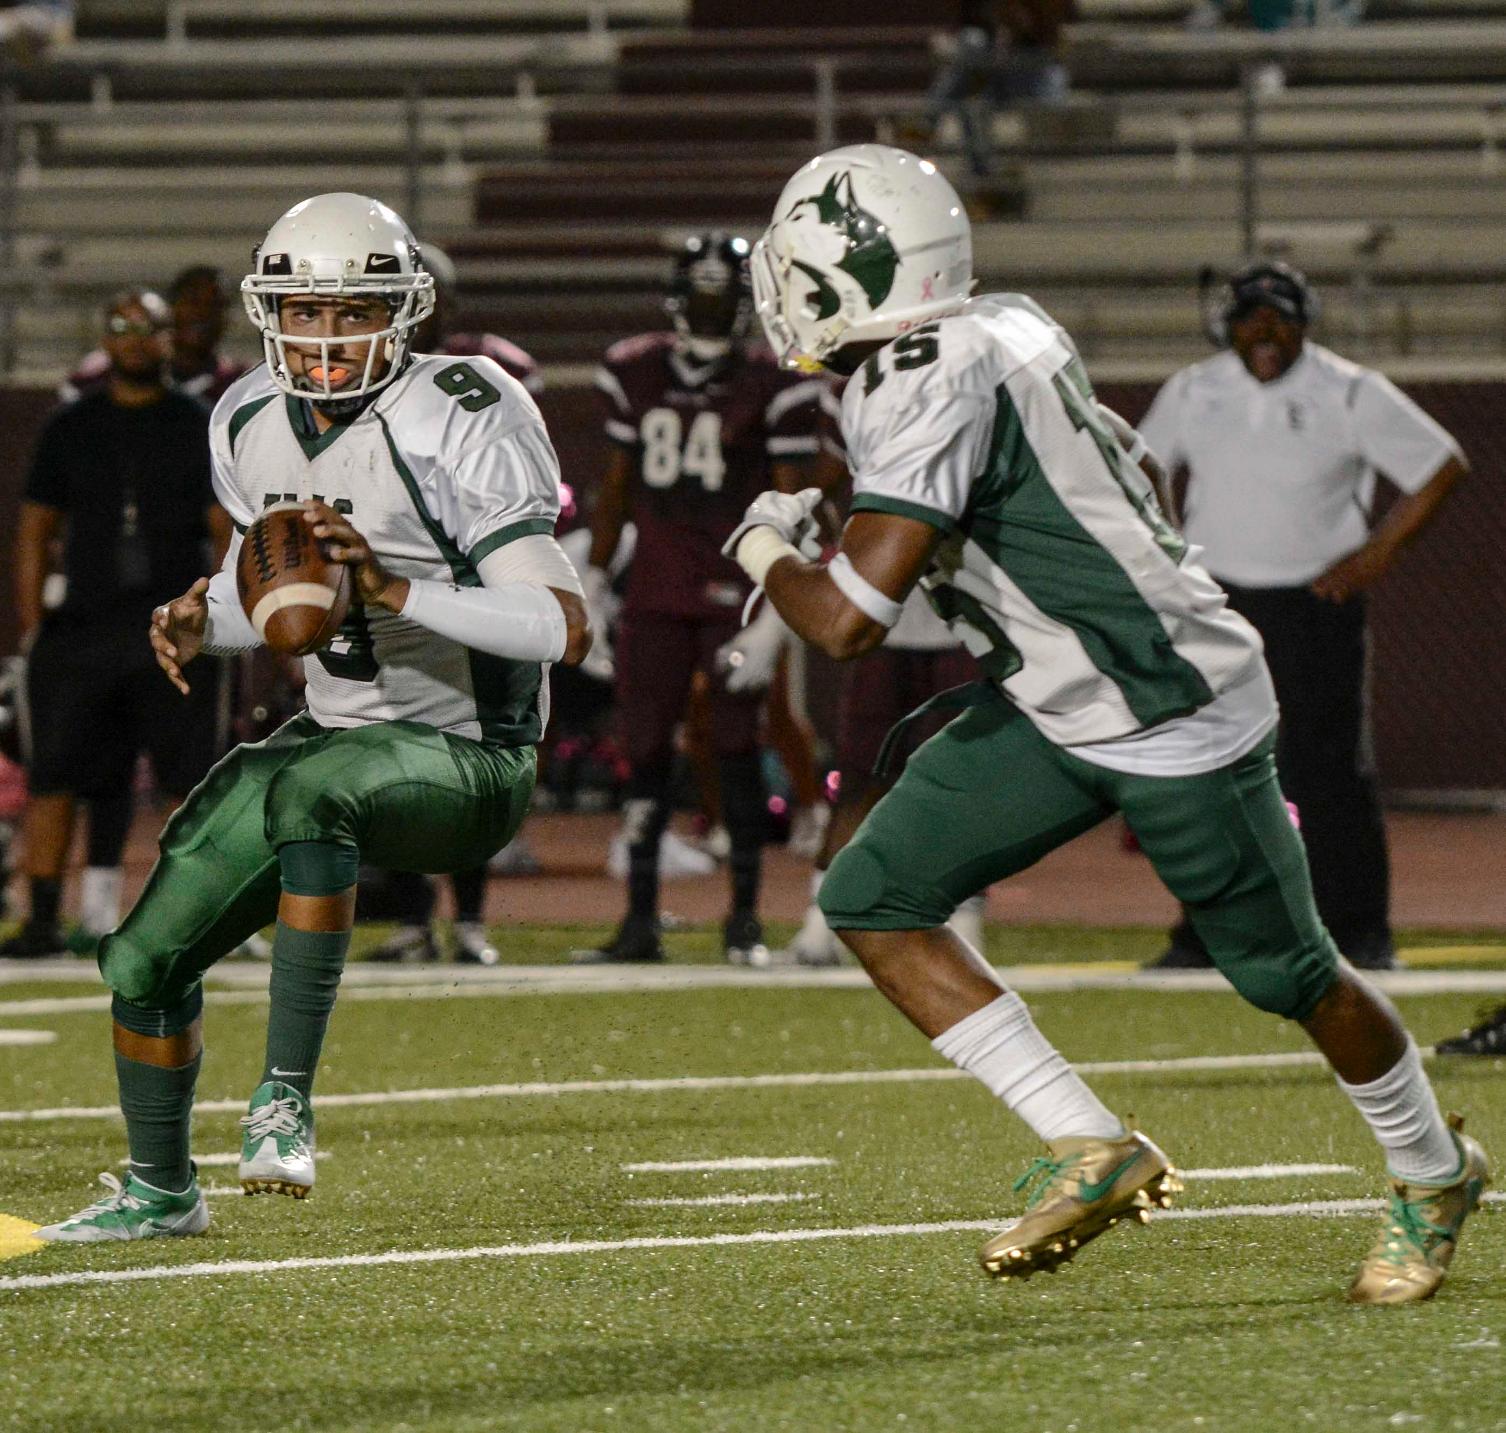 East Los Angeles College sophomore quarterback Jonathan Santos looks to swing the ball to sophomore running back Shaquille Shelton in a 56-22 win against conference rival ECC Compton Center on Oct. 8. (Photo by Tadzio Garcia)